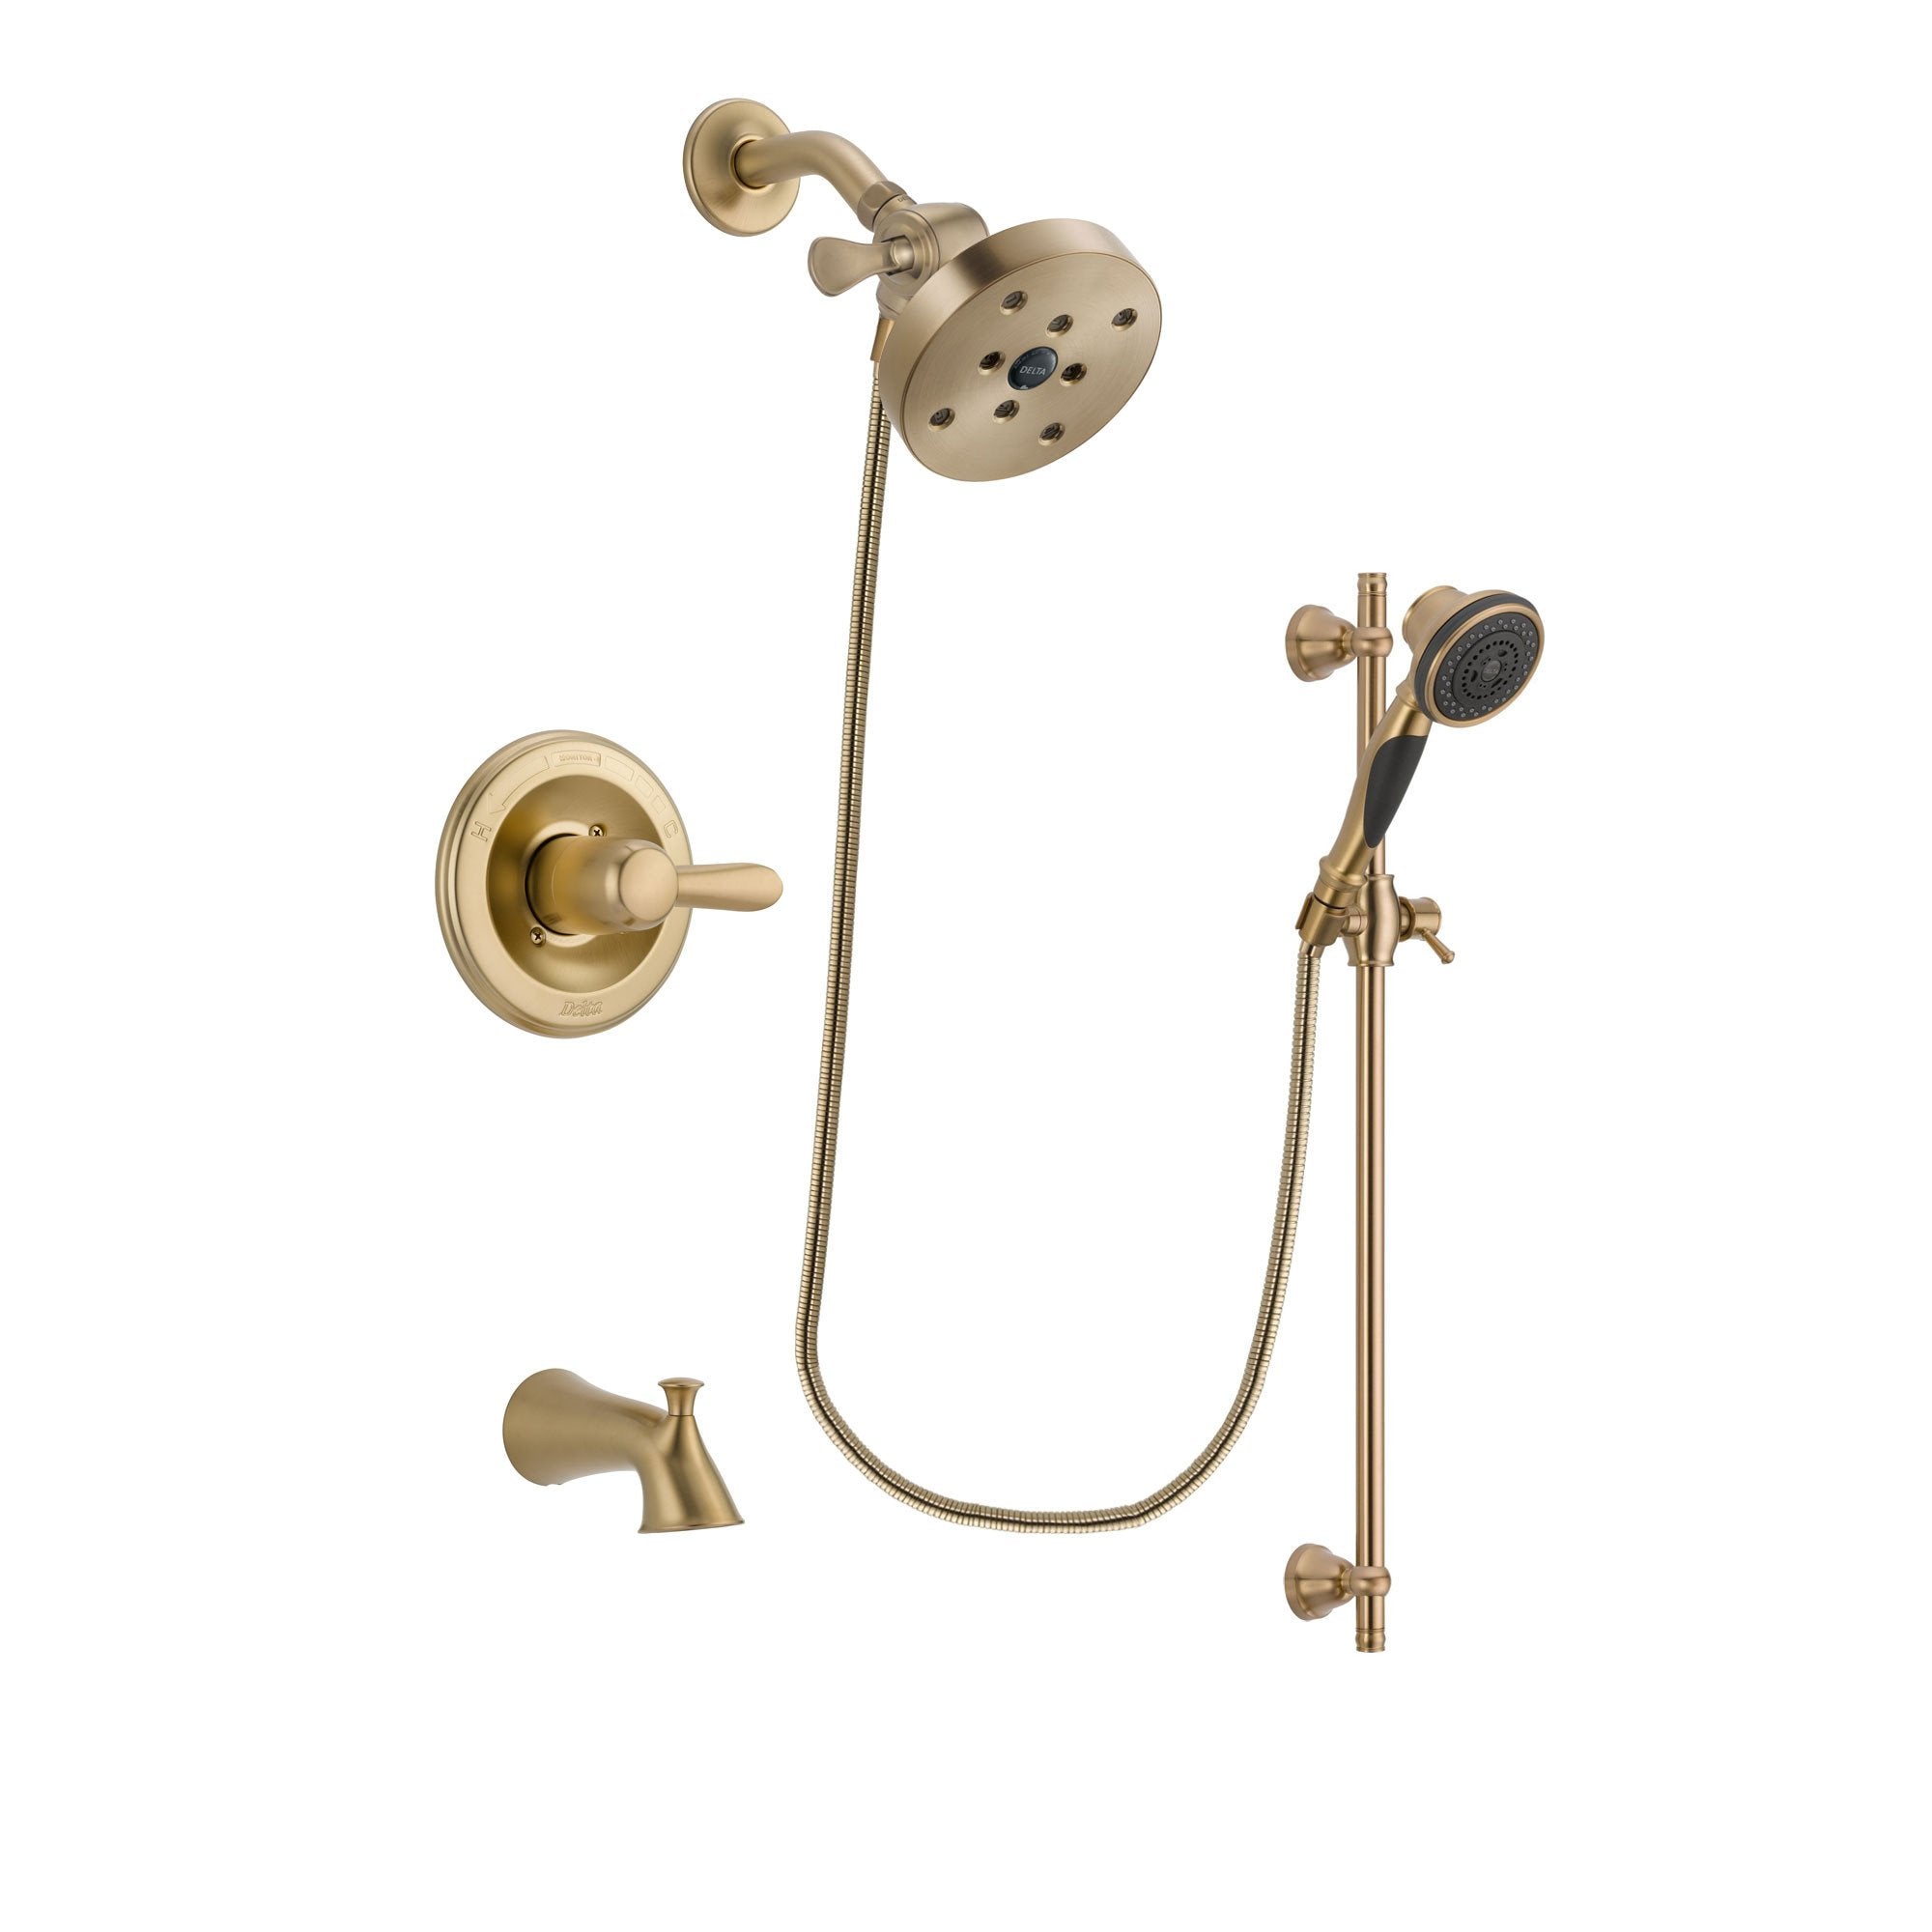 Delta Lahara Champagne Bronze Finish Tub and Shower Faucet System Package with 5-1/2 inch Showerhead and Personal Handheld Shower Spray with Slide Bar Includes Rough-in Valve and Tub Spout DSP3611V